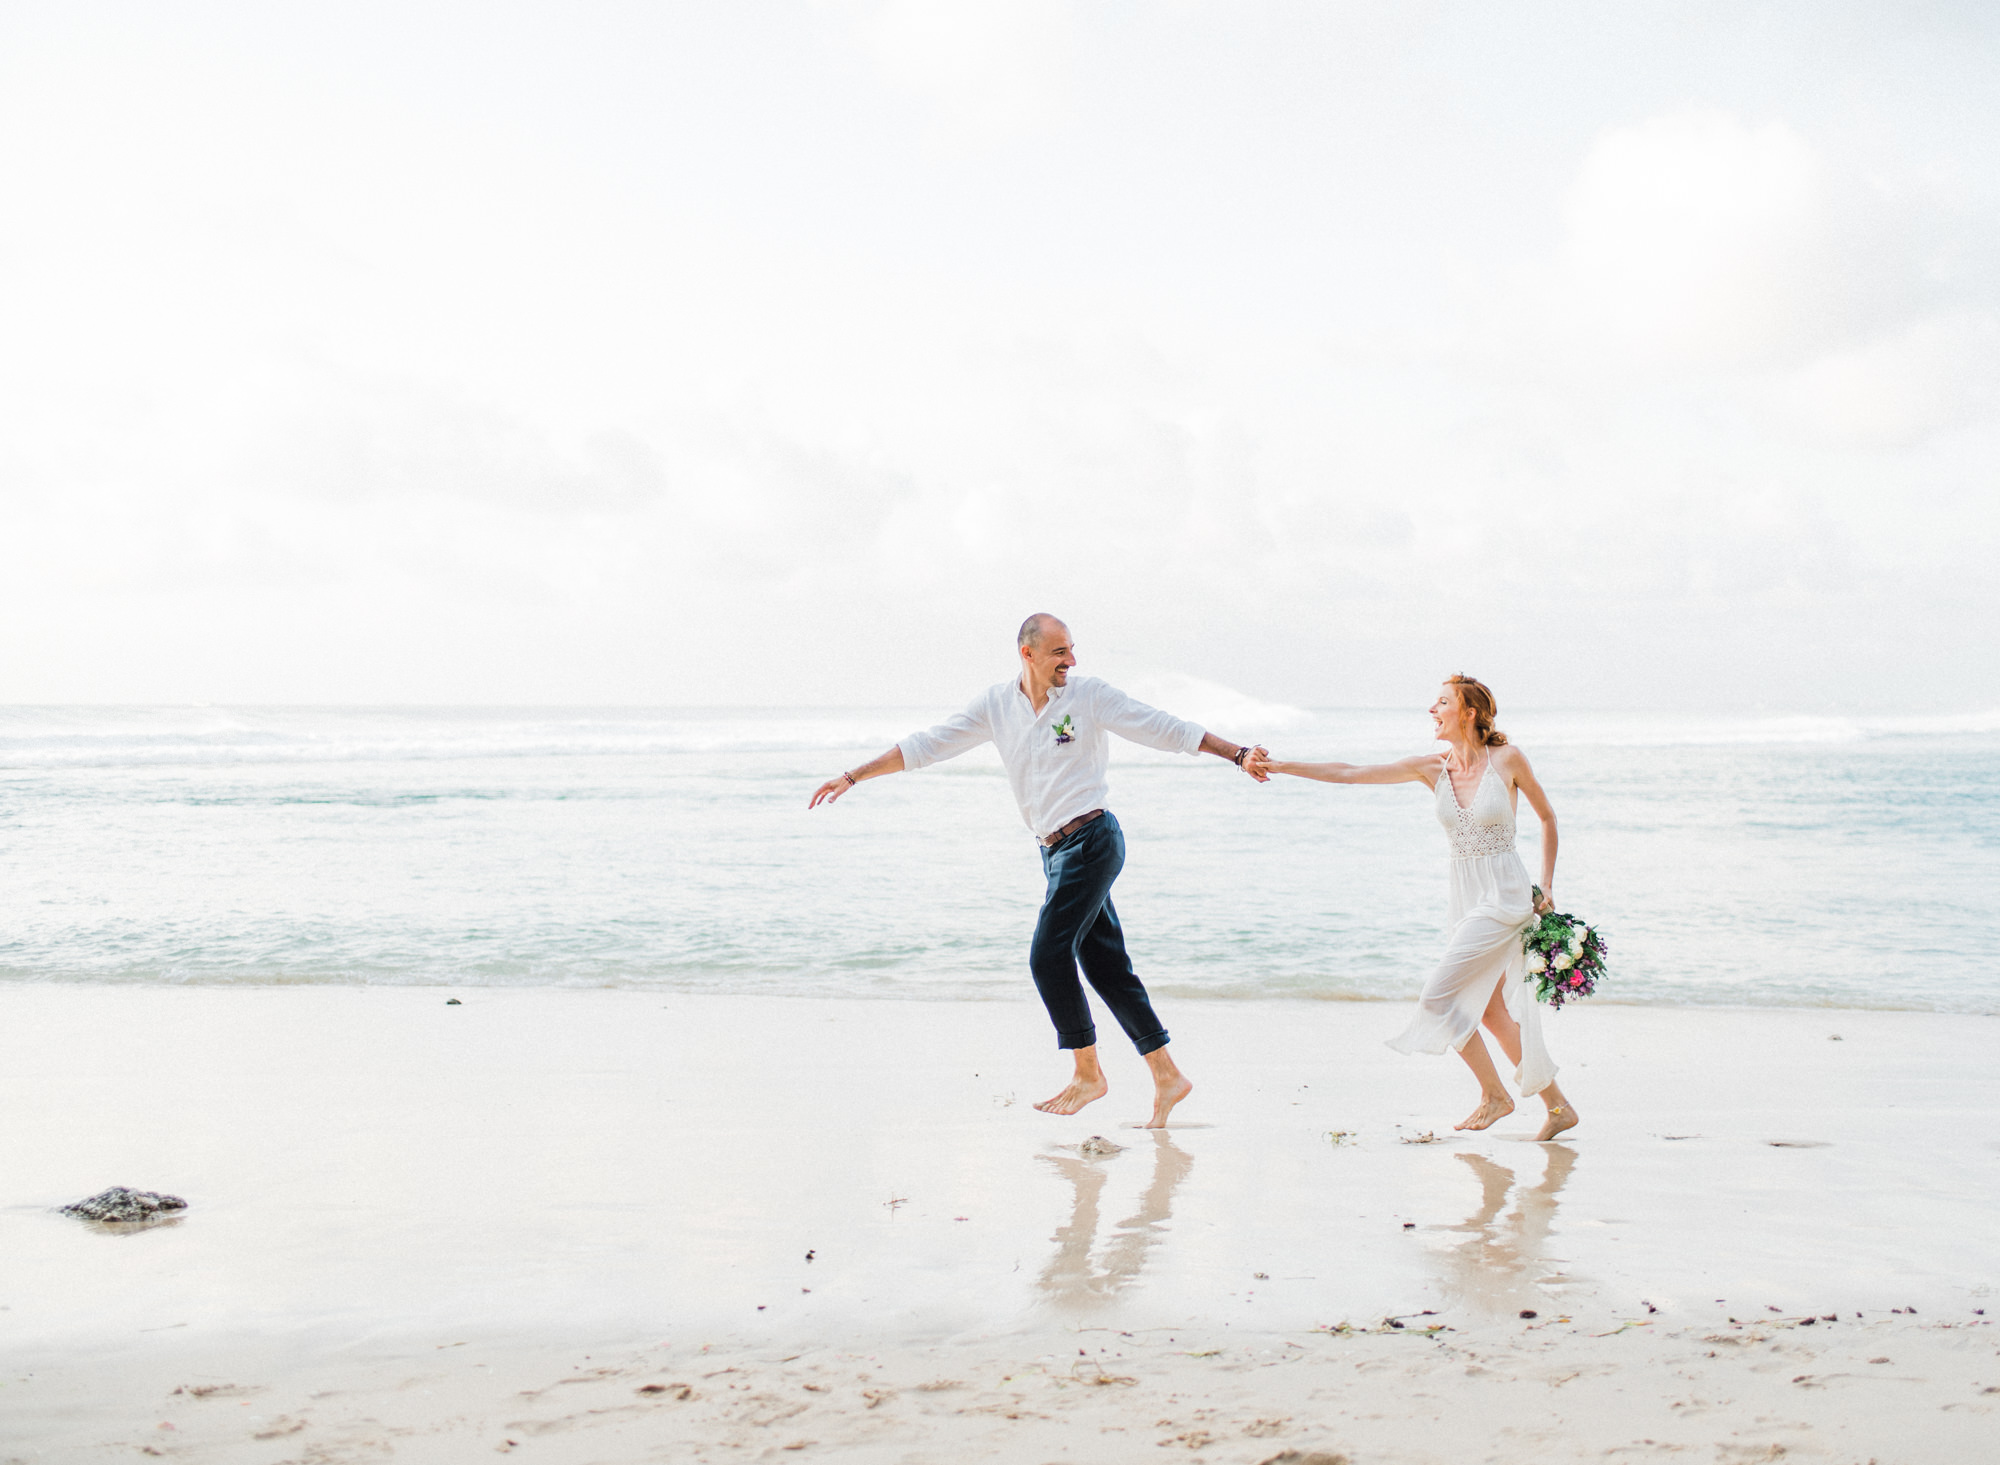 Bali Wedding Photography: Ultimate Guide for Couples